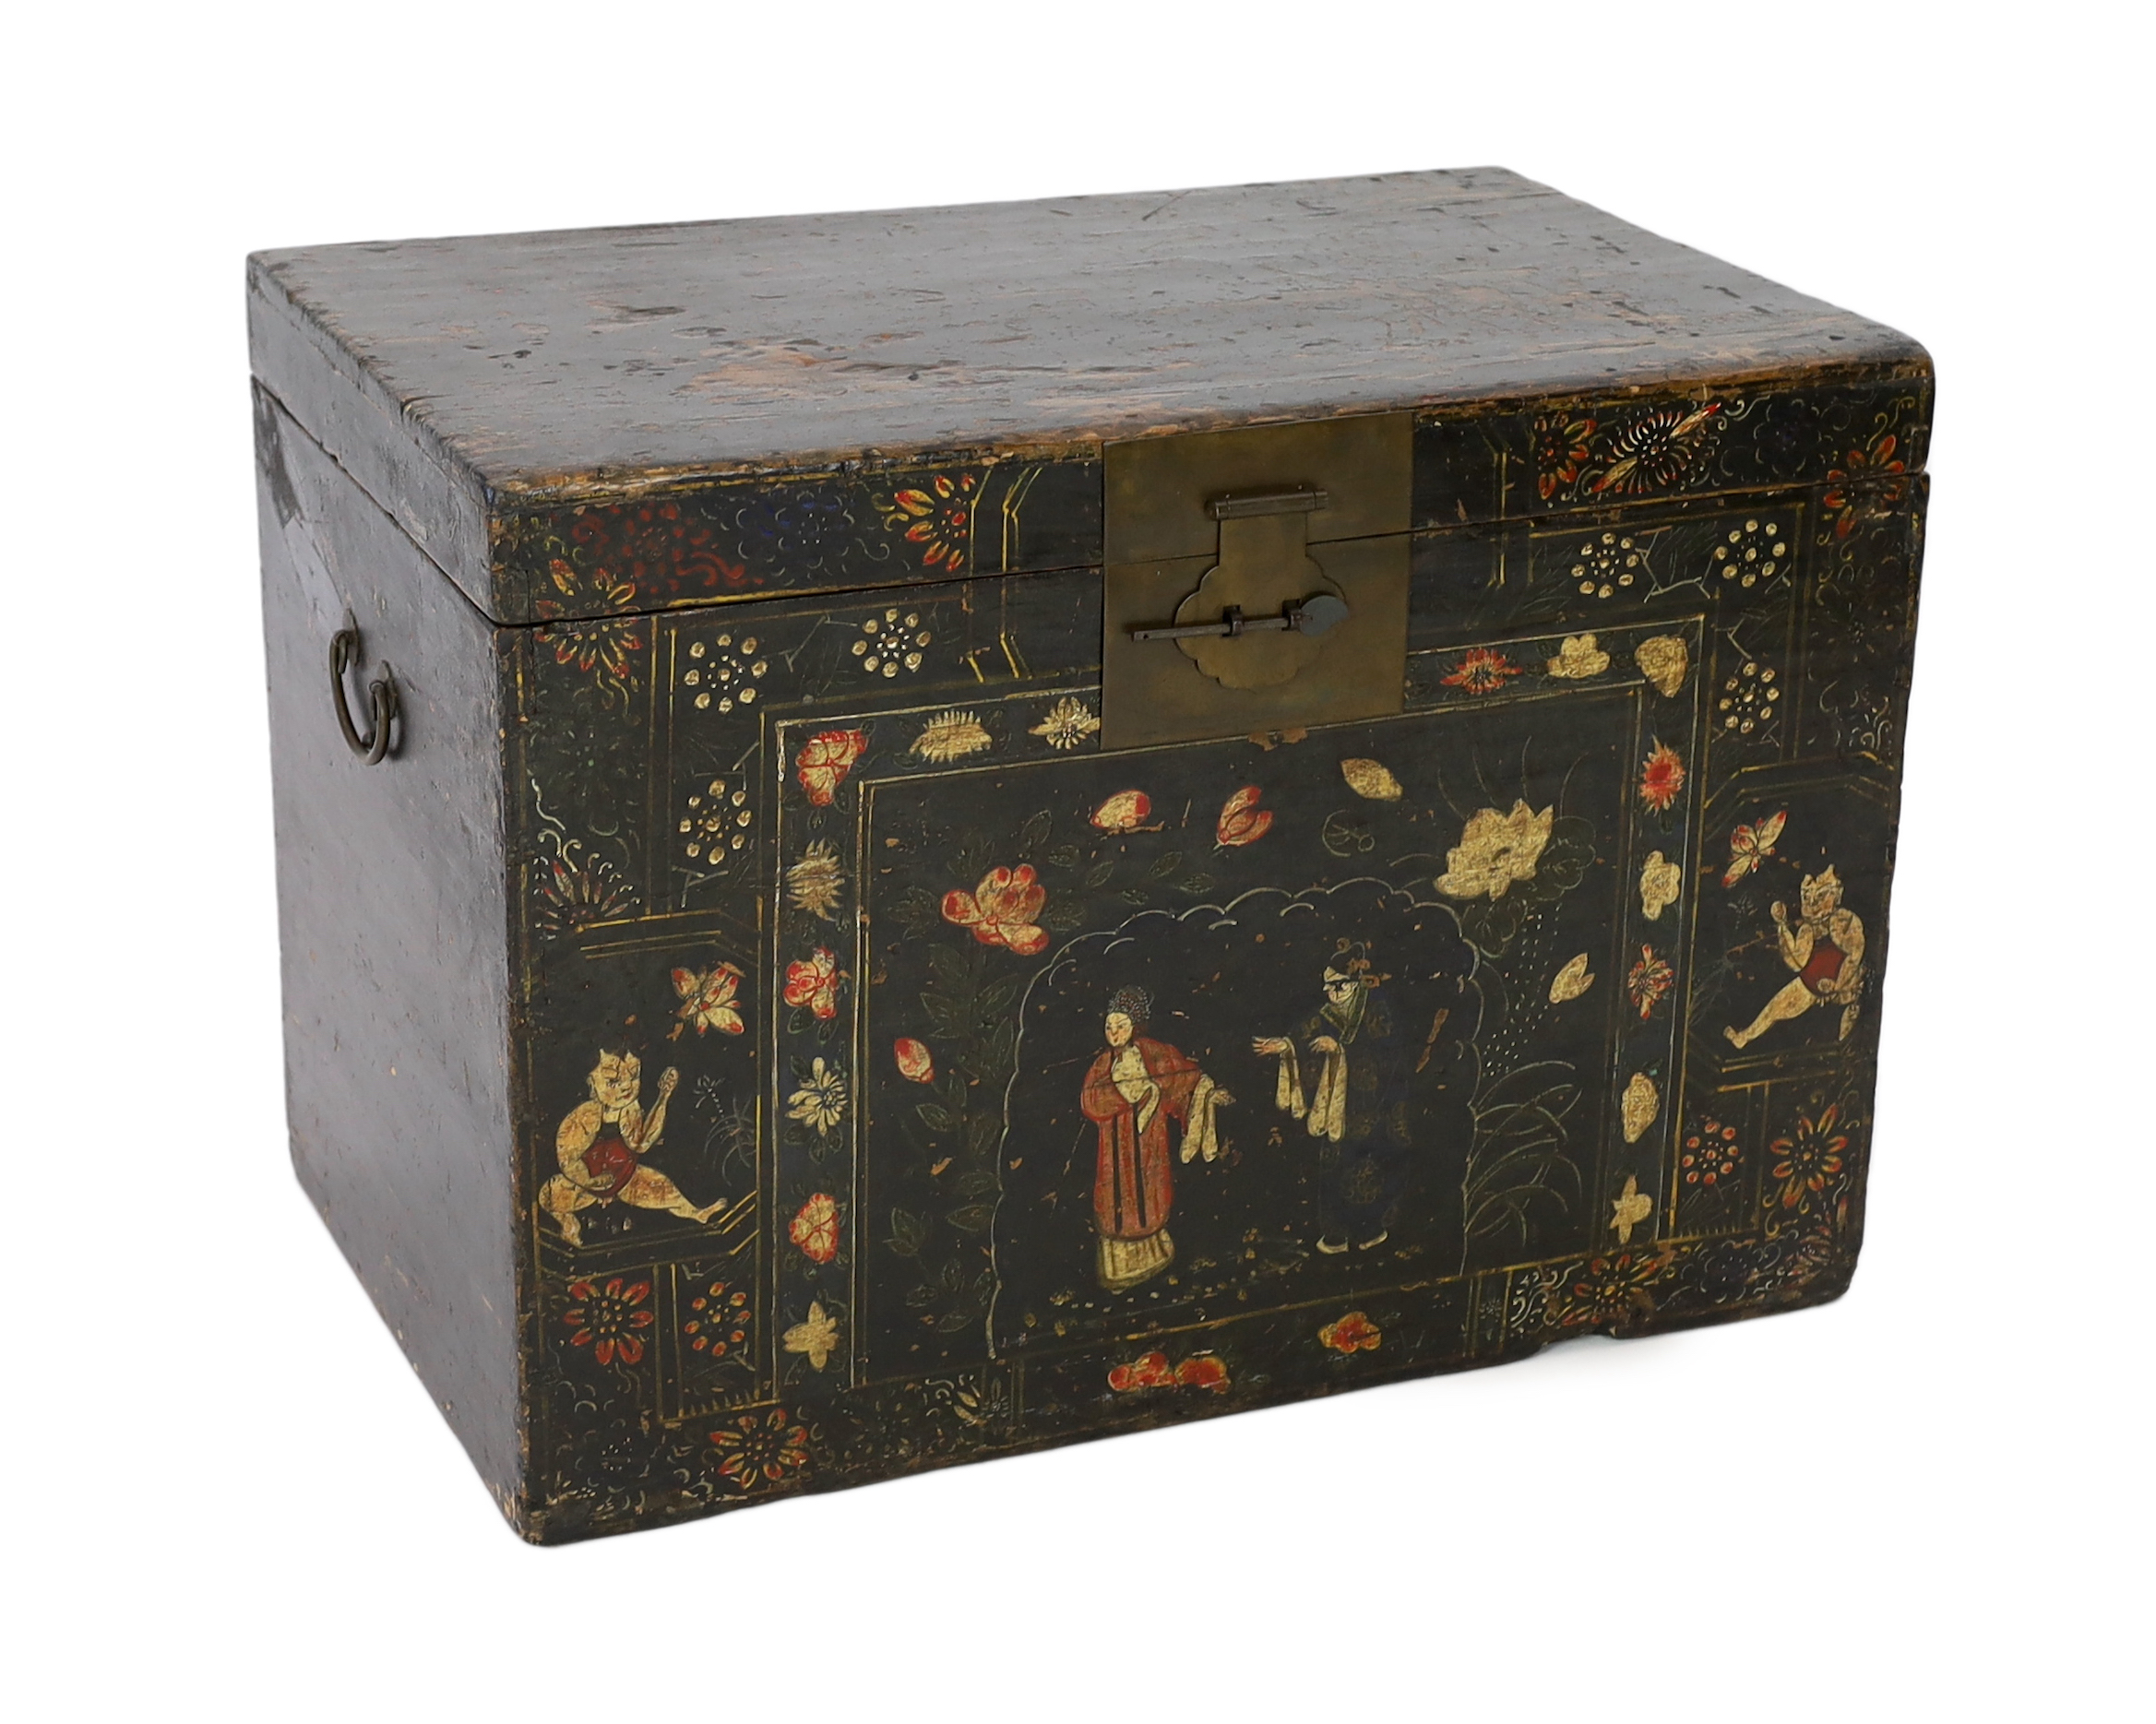 A Chinese lacquer trunk, width 84cm, depth 53cm, height 60cm